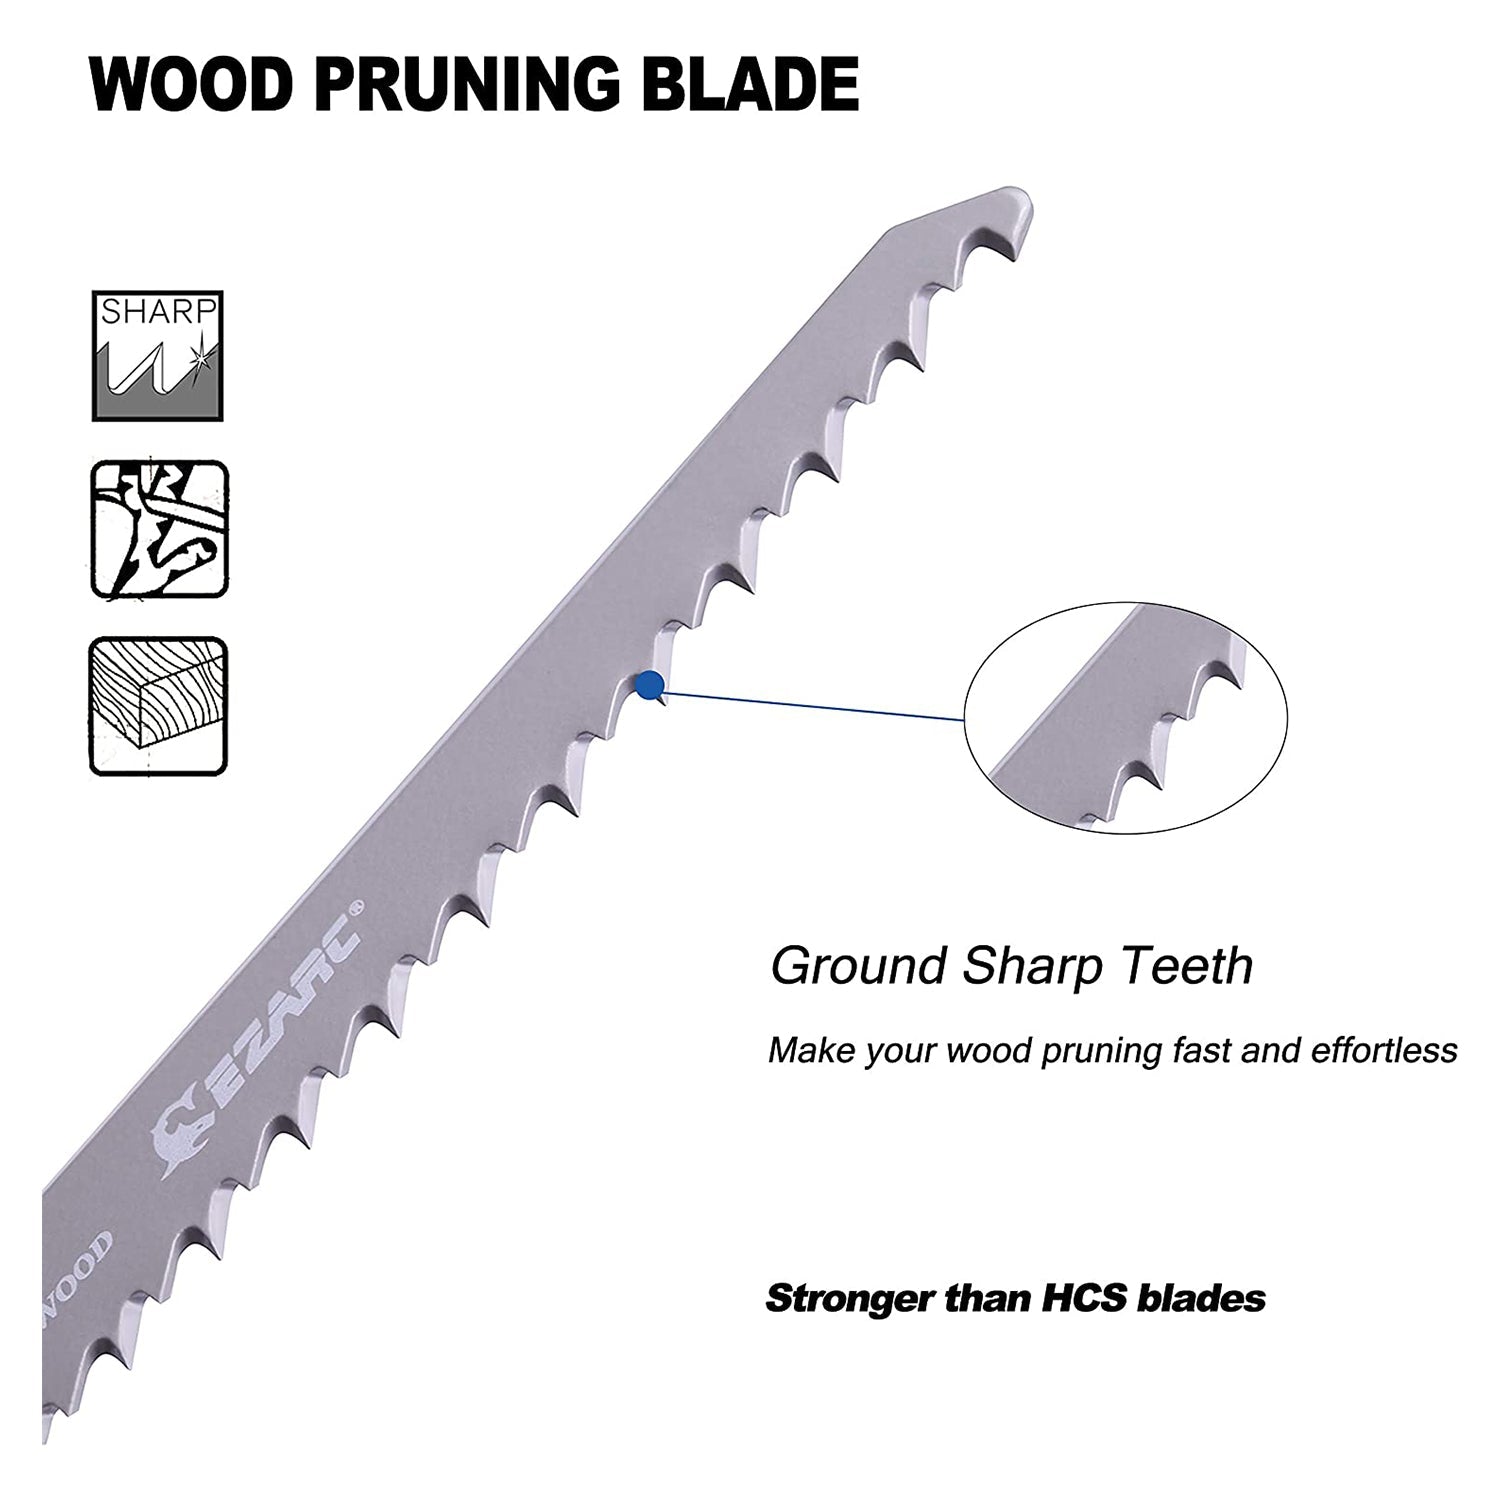 6tpi,6 in. CRV Sharp Ground Teeth Reciprocating Saw Blade For Pruning